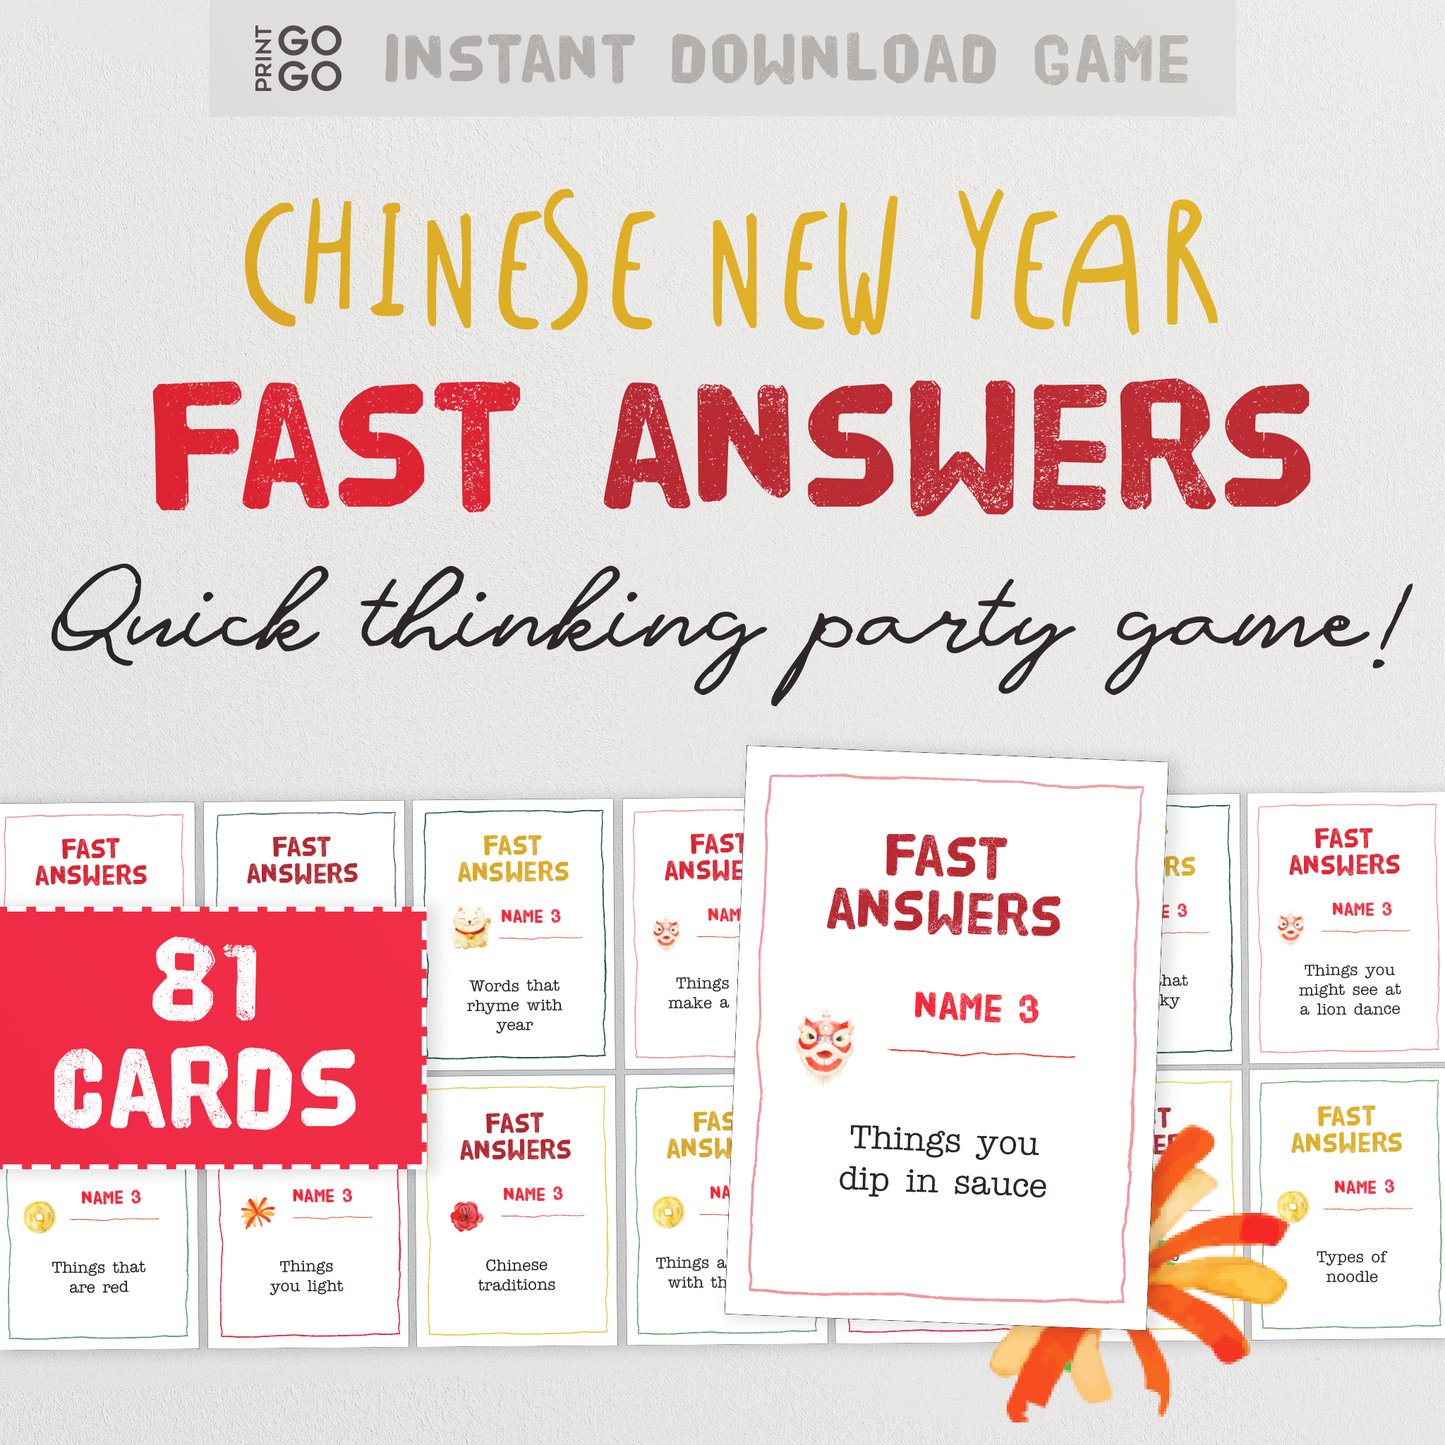 Chinese New Year Fast Answers - The Fun Quick Thinking Family Party Game